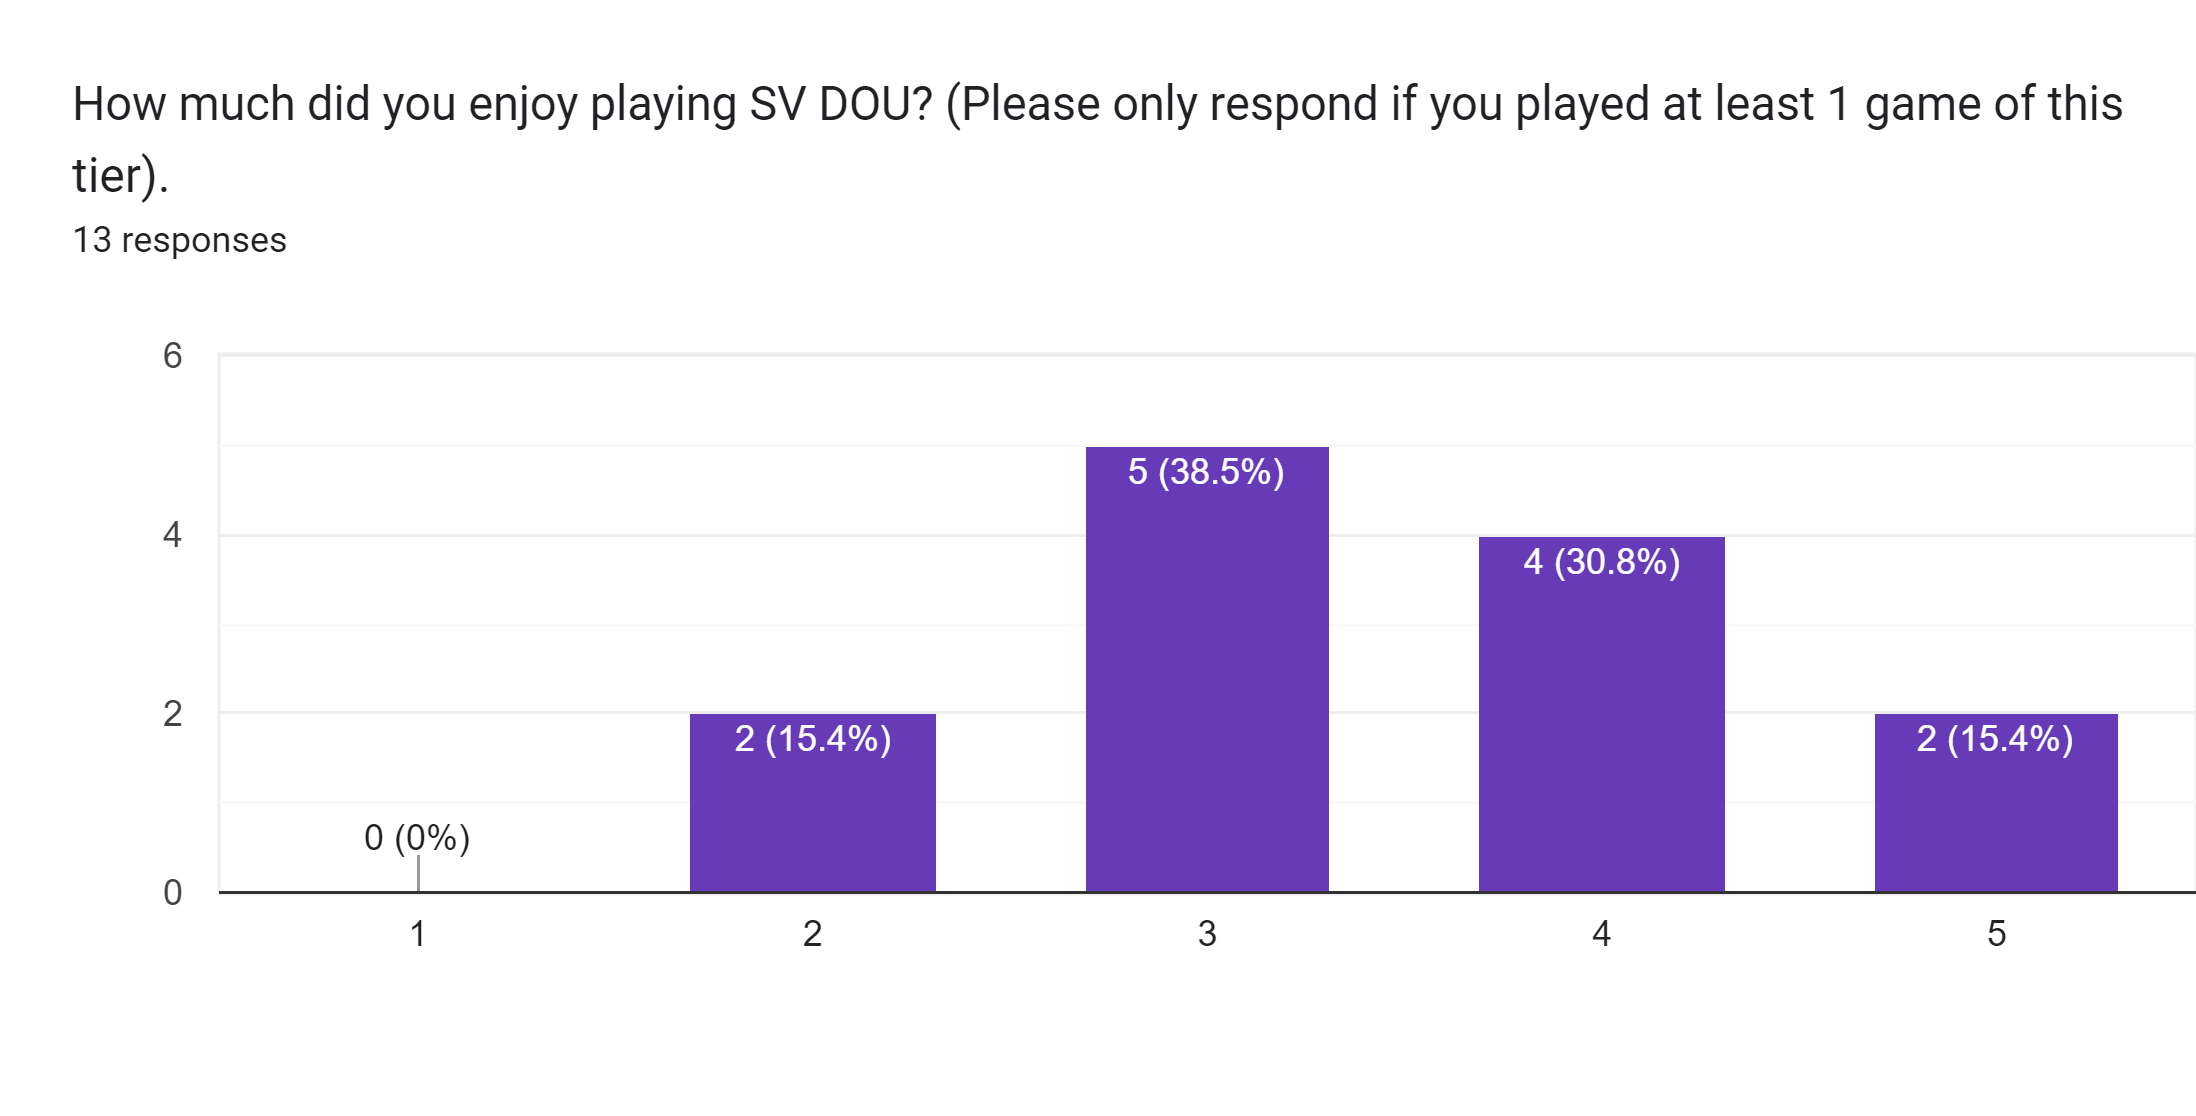 Forms response chart. Question title: How much did you enjoy playing SV DOU? (Please only respond if you played at least 1 game of this tier).. Number of responses: 13 responses.